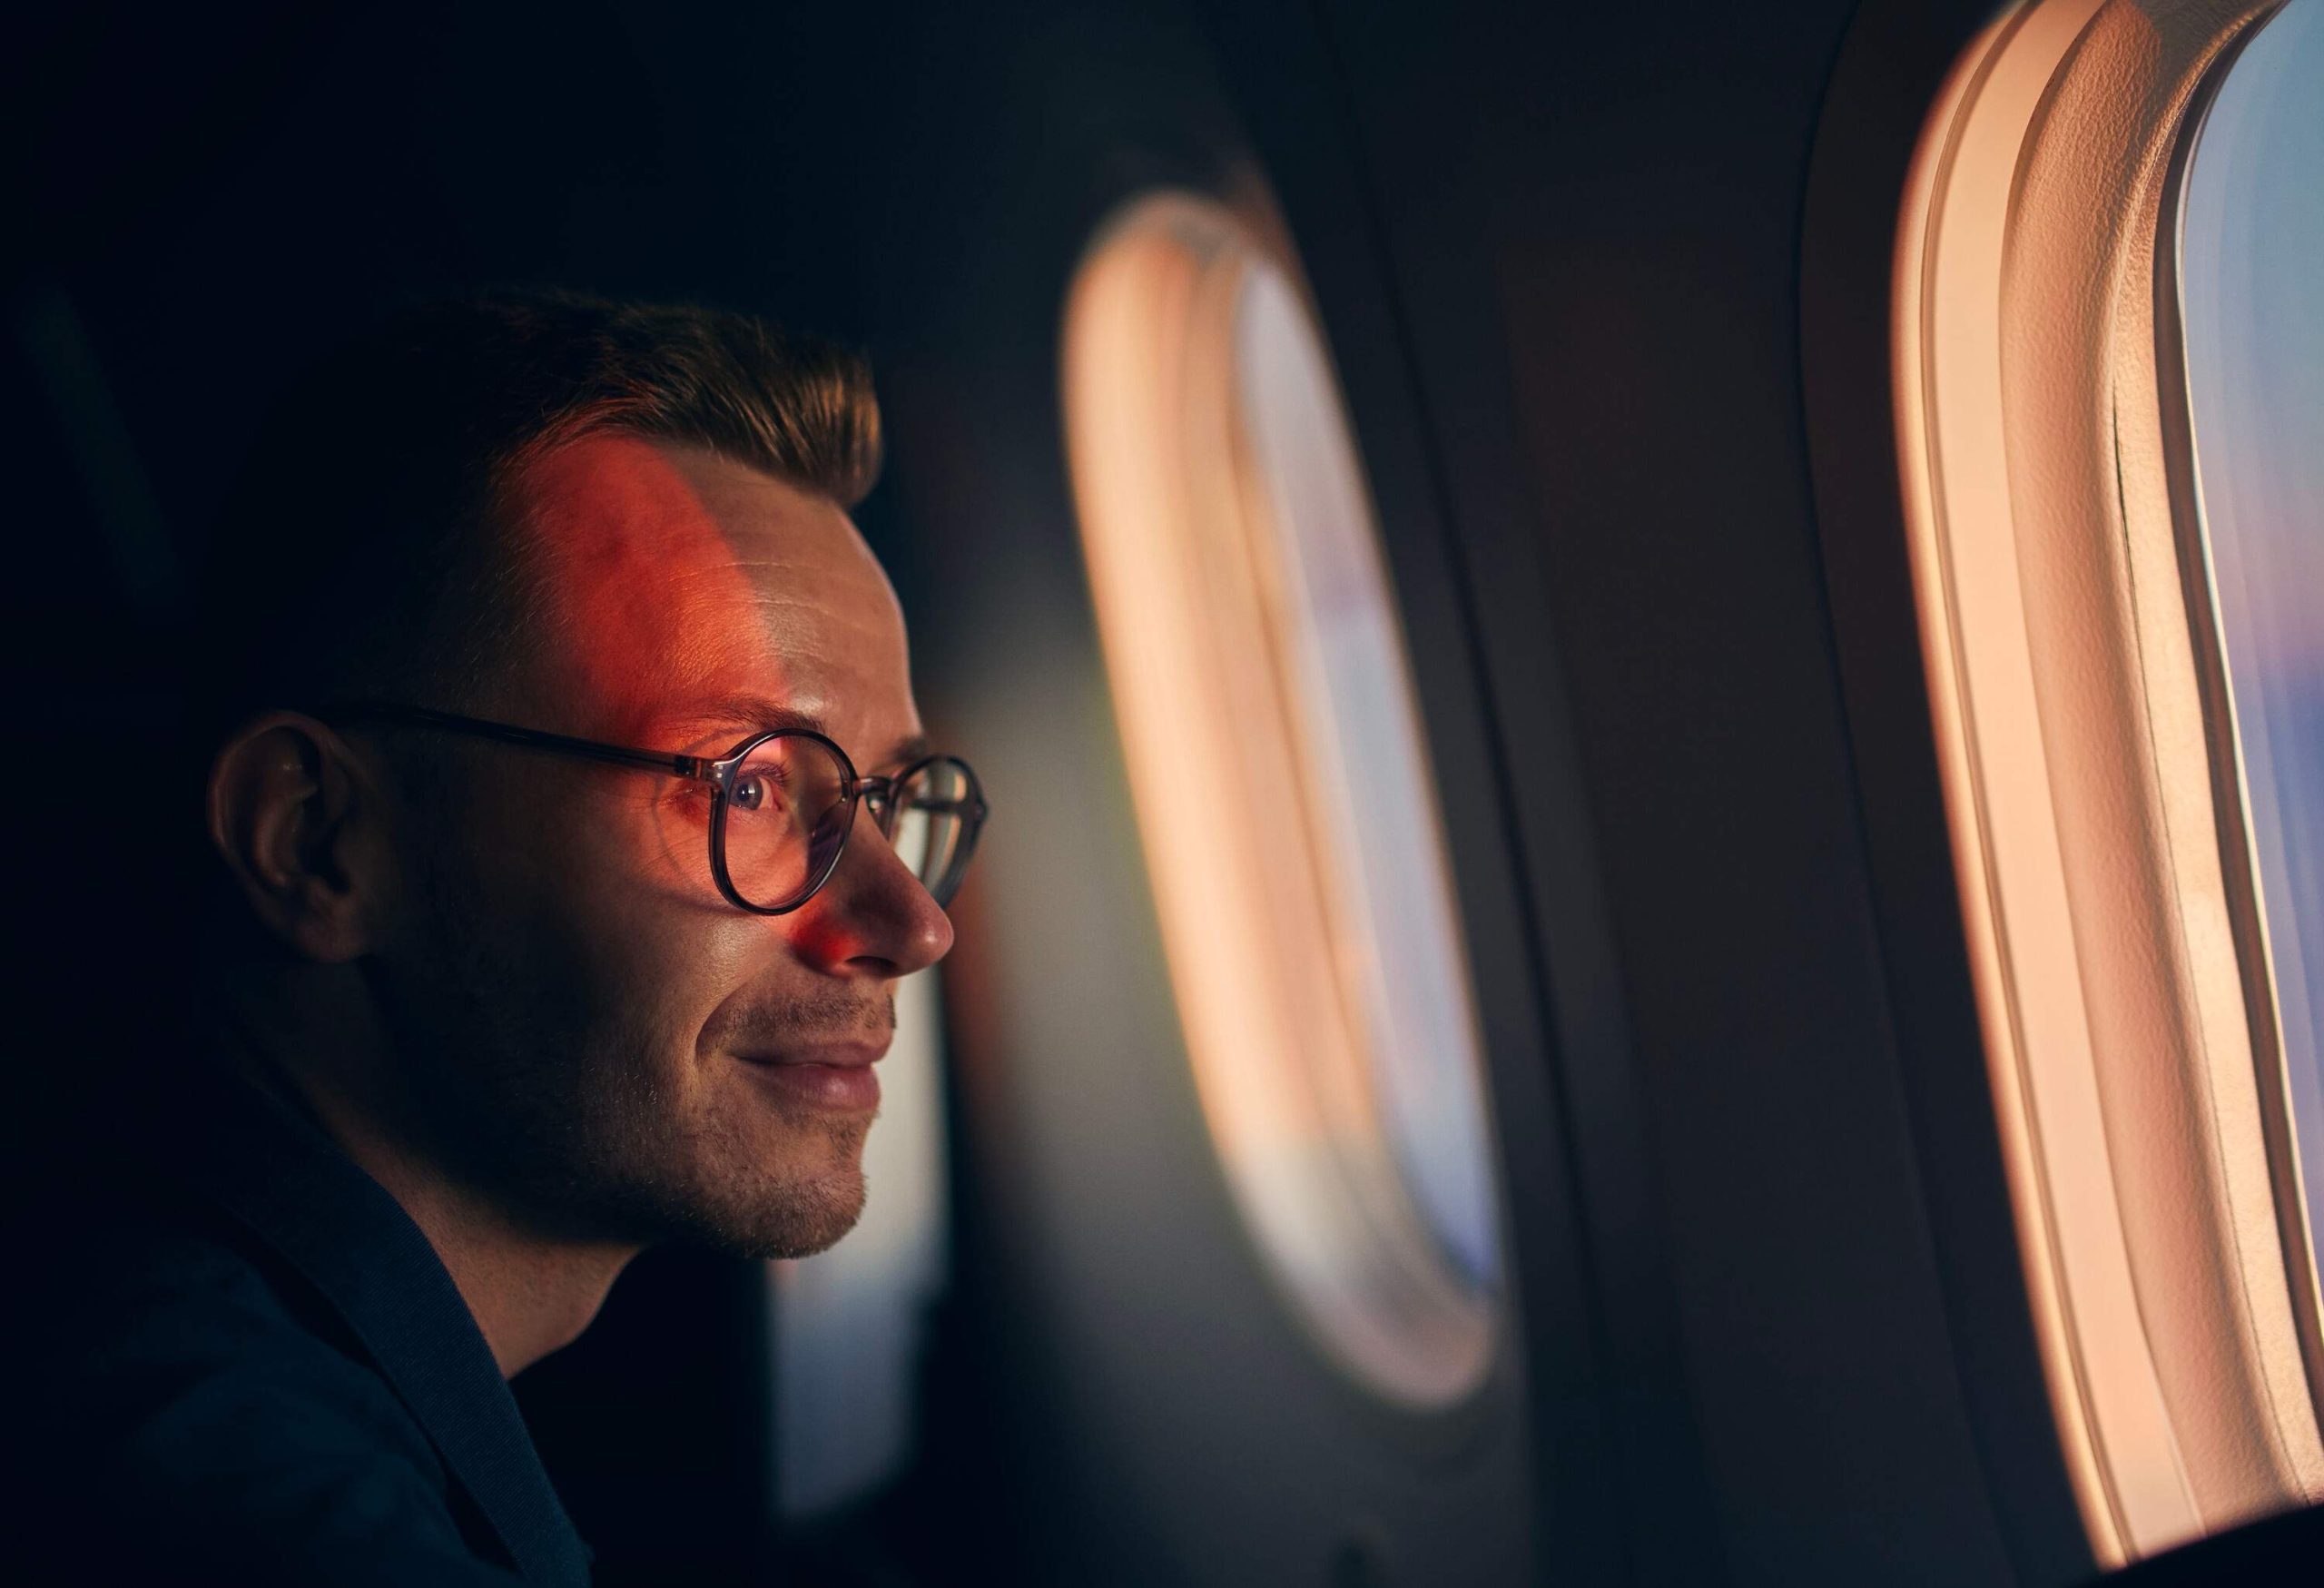 A man wearing eyeglasses smiling as he looks out the window of an airplane.